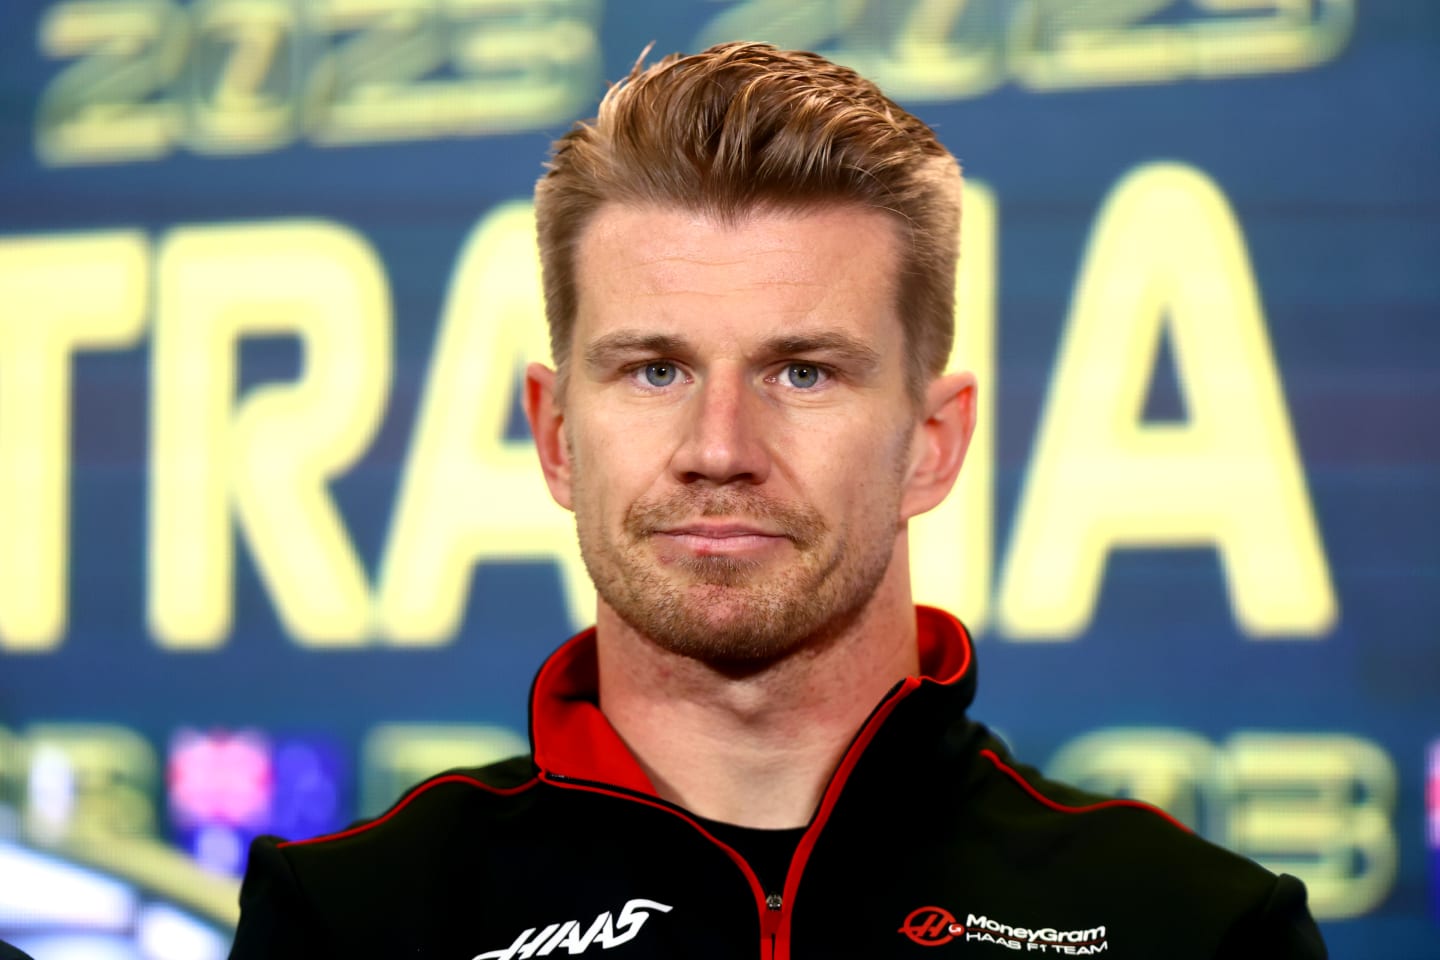 MELBOURNE, AUSTRALIA - MARCH 30: Nico Hulkenberg of Germany and Haas F1 attends the Drivers Press Conference during previews ahead of the F1 Grand Prix of Australia at Albert Park Grand Prix Circuit on March 30, 2023 in Melbourne, Australia. (Photo by Dan Istitene/Getty Images)